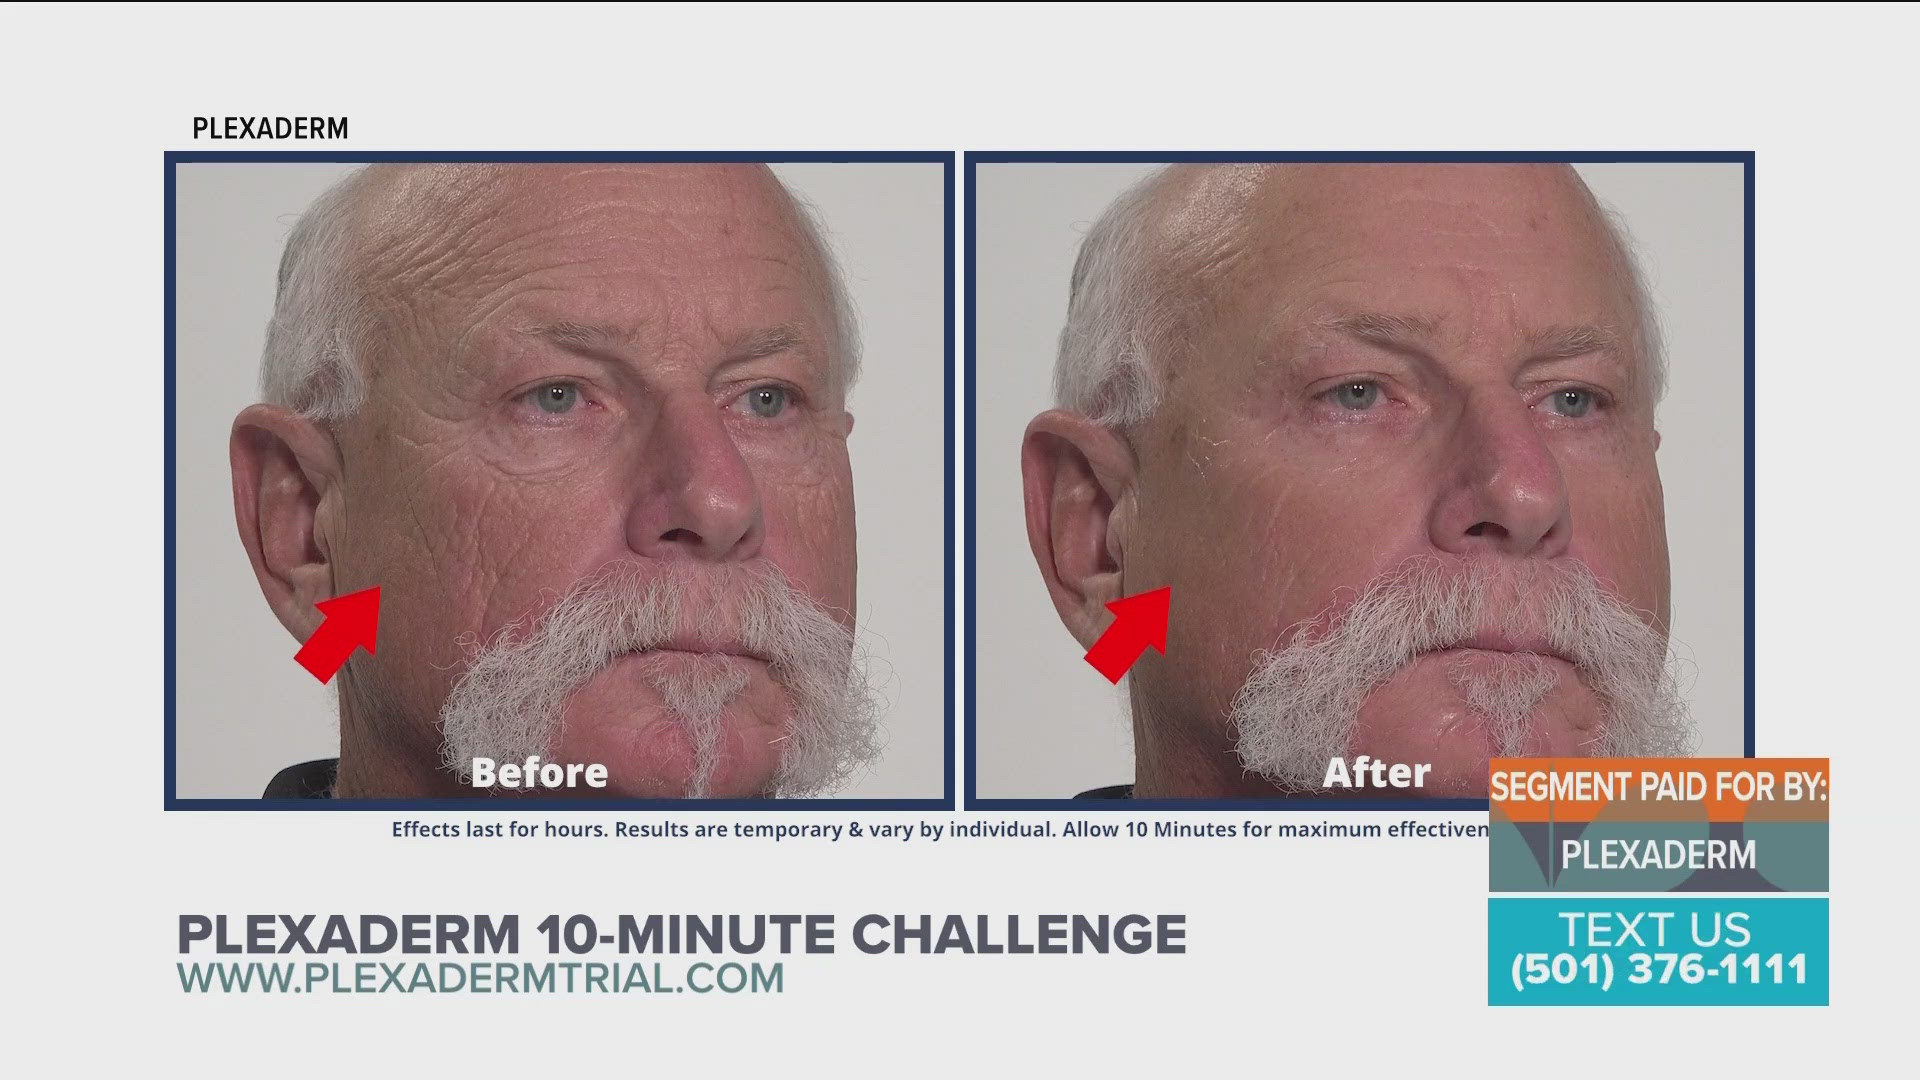 Take the Plexaderm 10-minute challenge and shrink under-eye bag and wrinkles.  A $14.95 trial pack with free shipping is available.